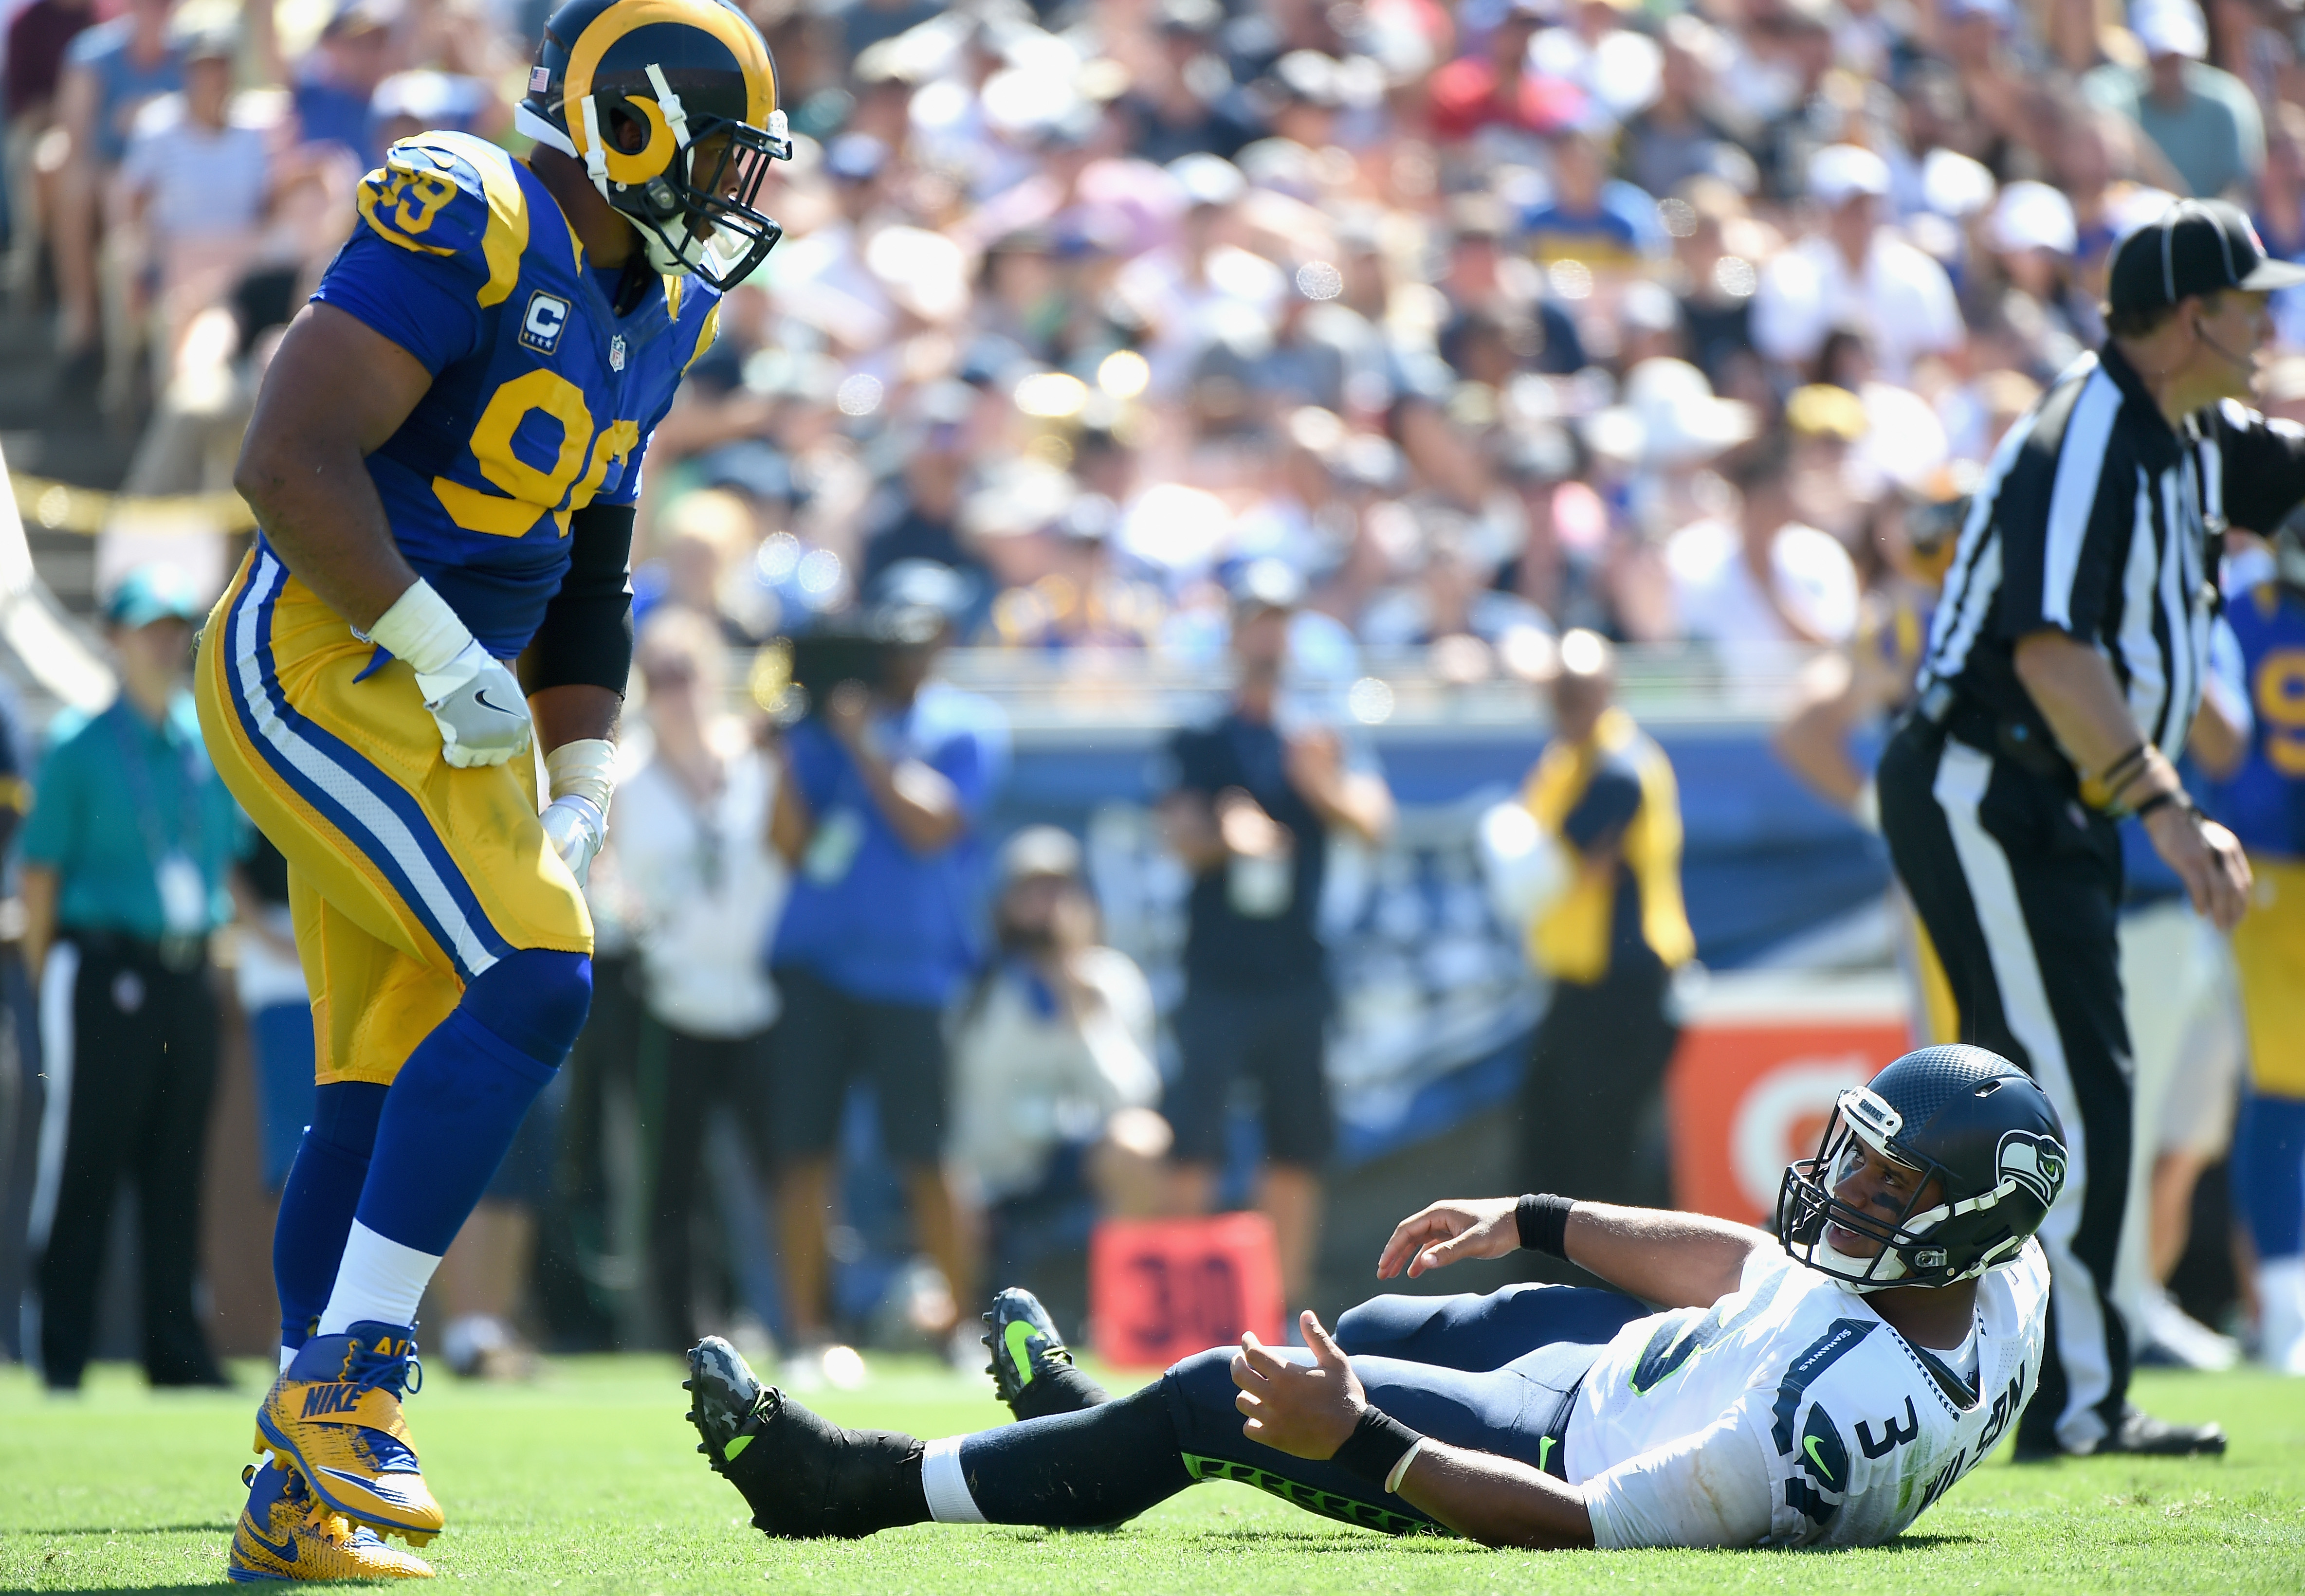 Los Angeles Rams DL Aaron Donald celebrates after sacking Seattle Seahawks QB Russell Wilson in Week 2, September 18, 2016.